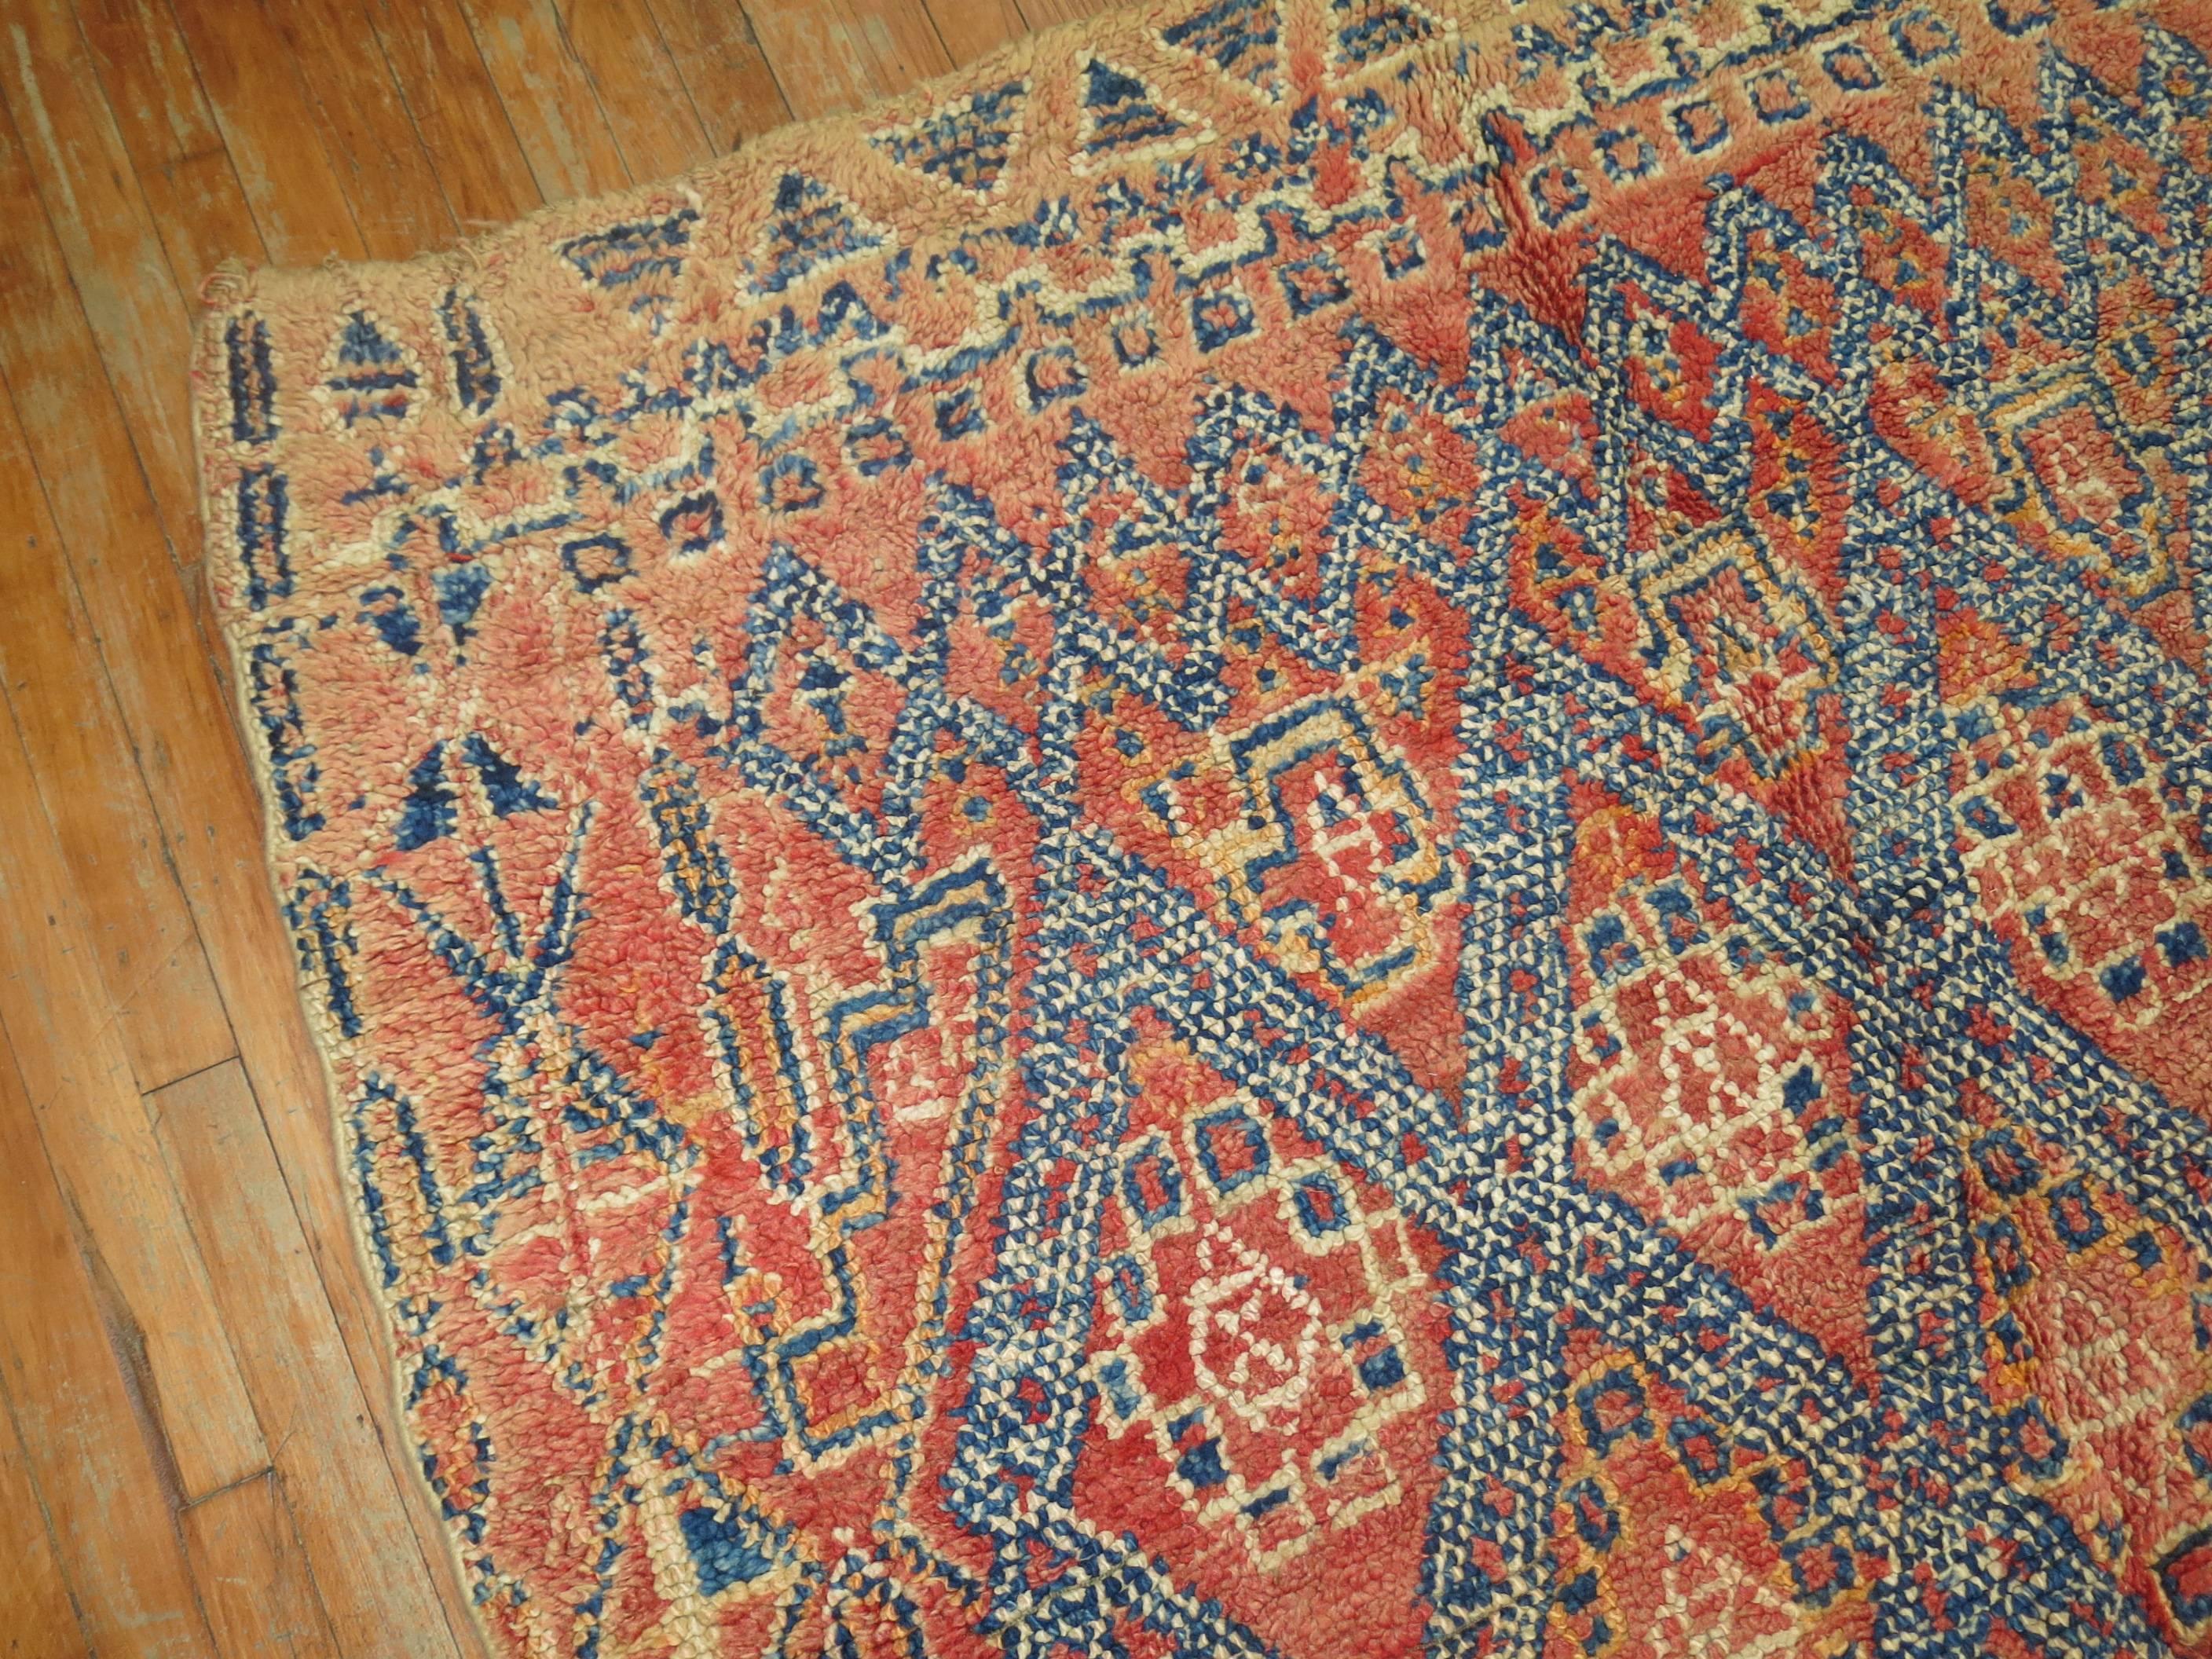 An authentic early 20th century one of a kind Moroccan rug.